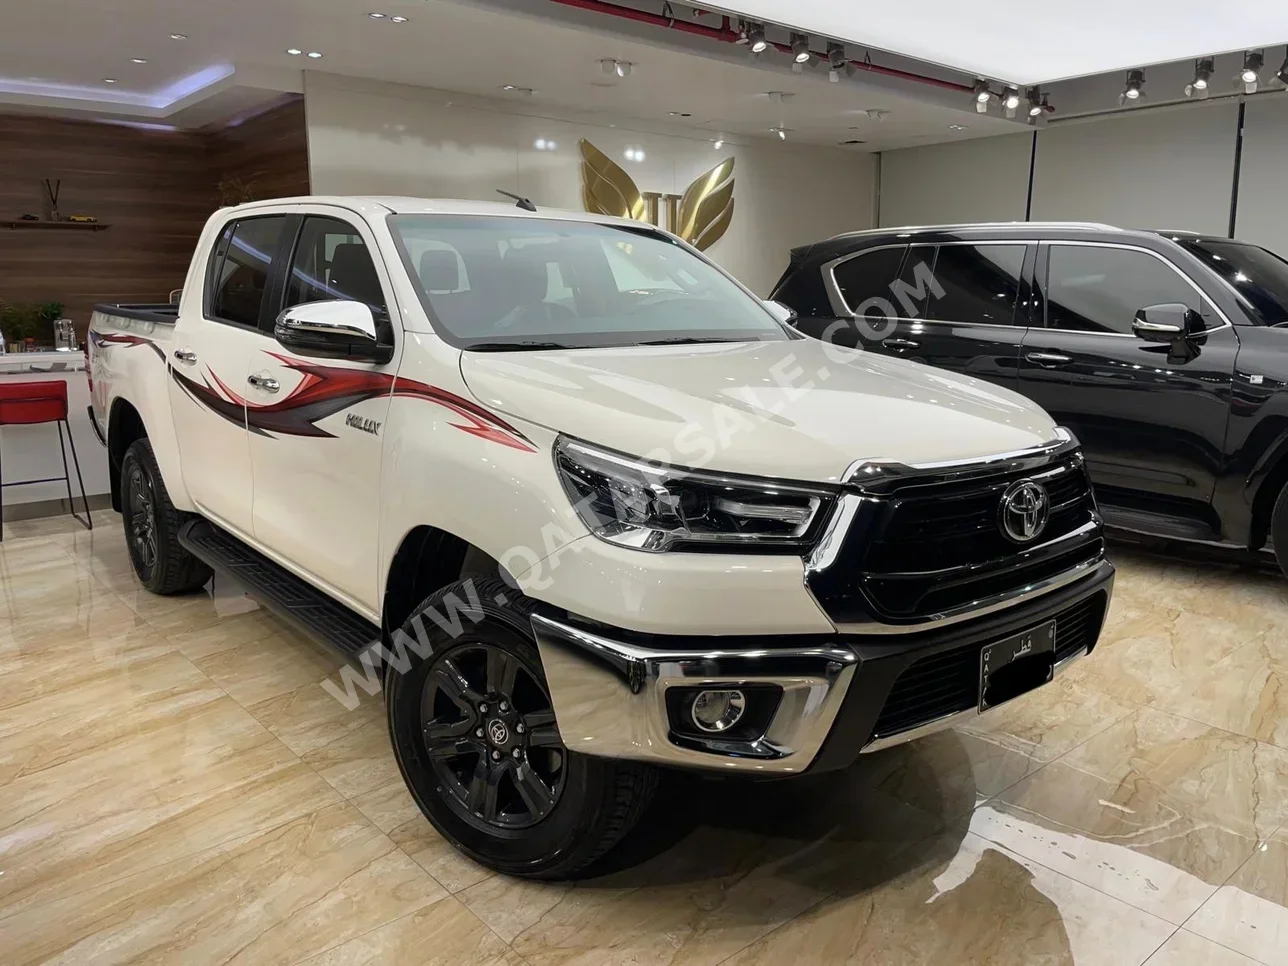 Toyota  Hilux  SR5  2023  Automatic  10,000 Km  4 Cylinder  Four Wheel Drive (4WD)  Pick Up  White  With Warranty